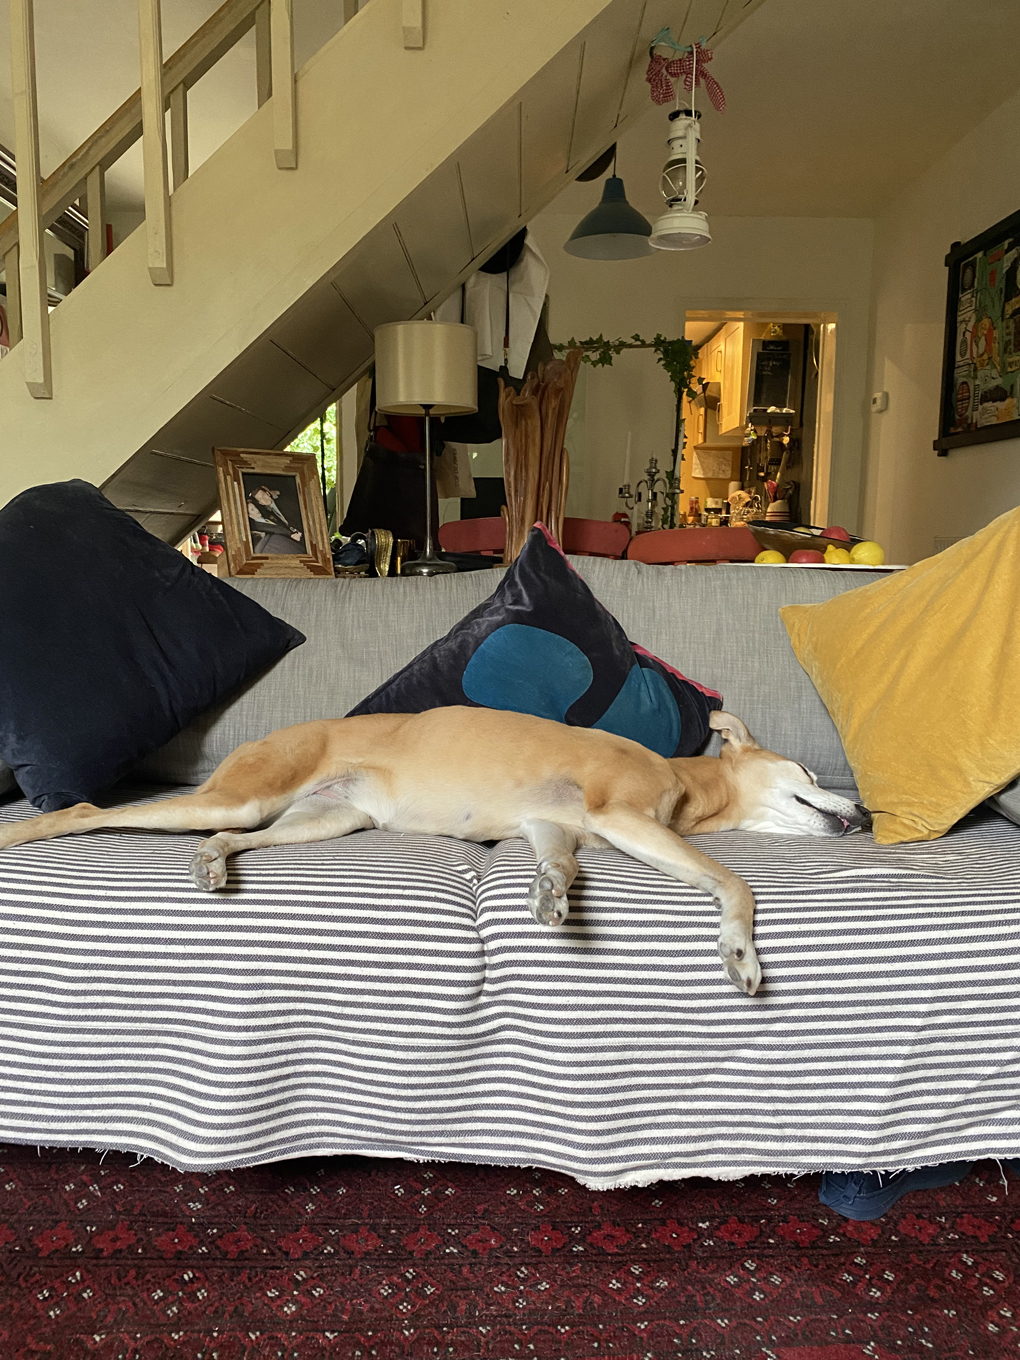 A hot dog stretched out lazily across a sofa